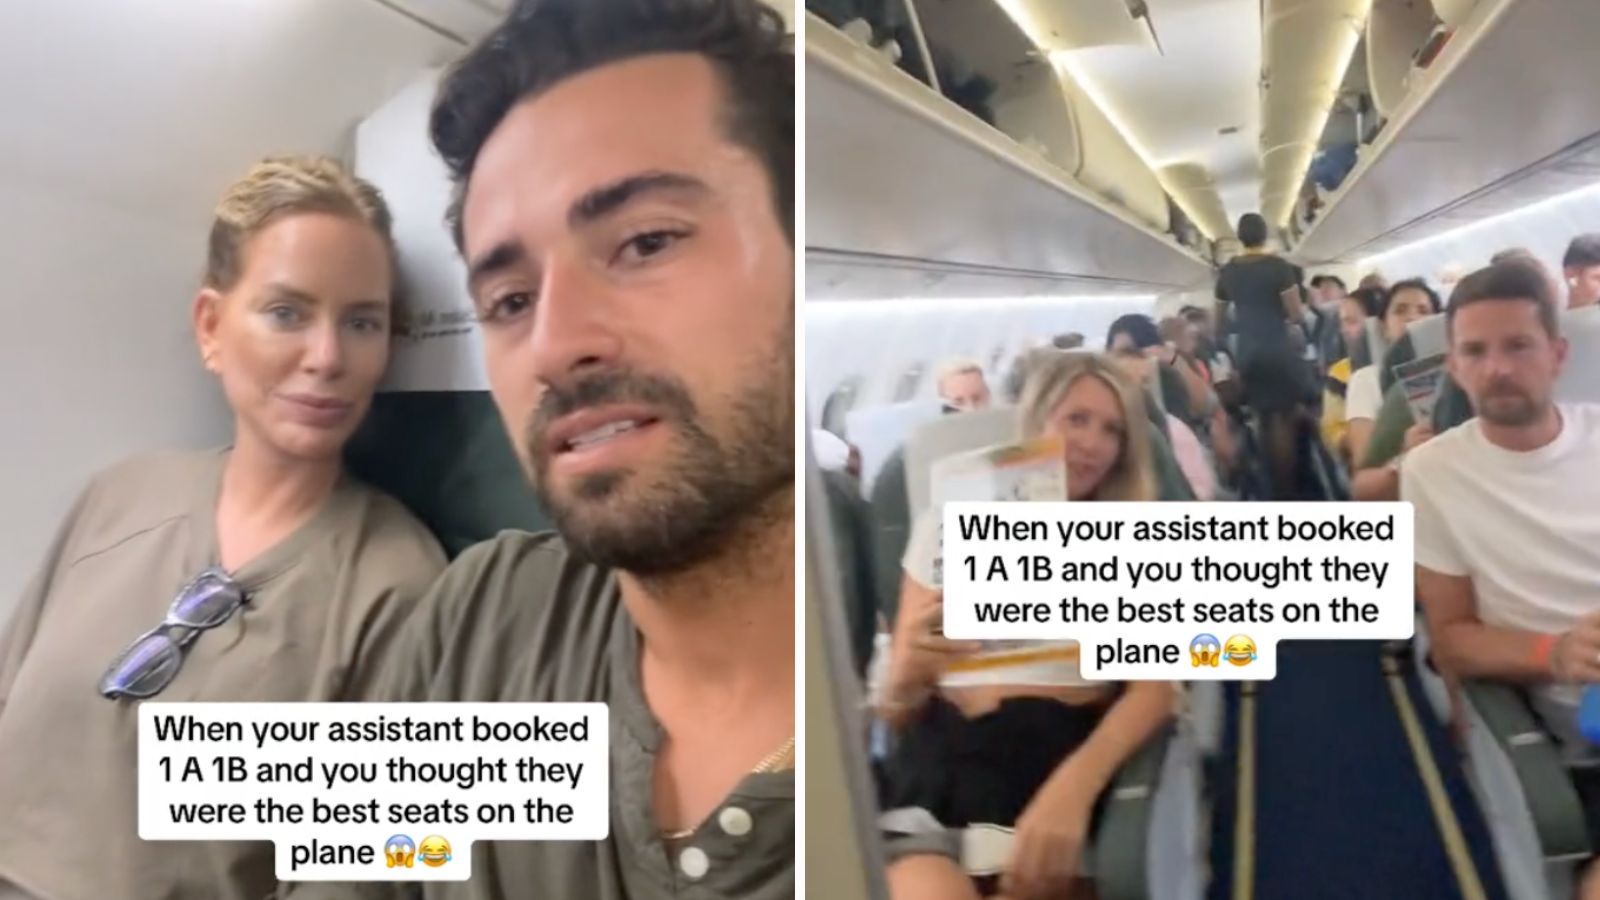 Couple stunned after booking what they thought were the ‘best seats’ on plane - Dexerto